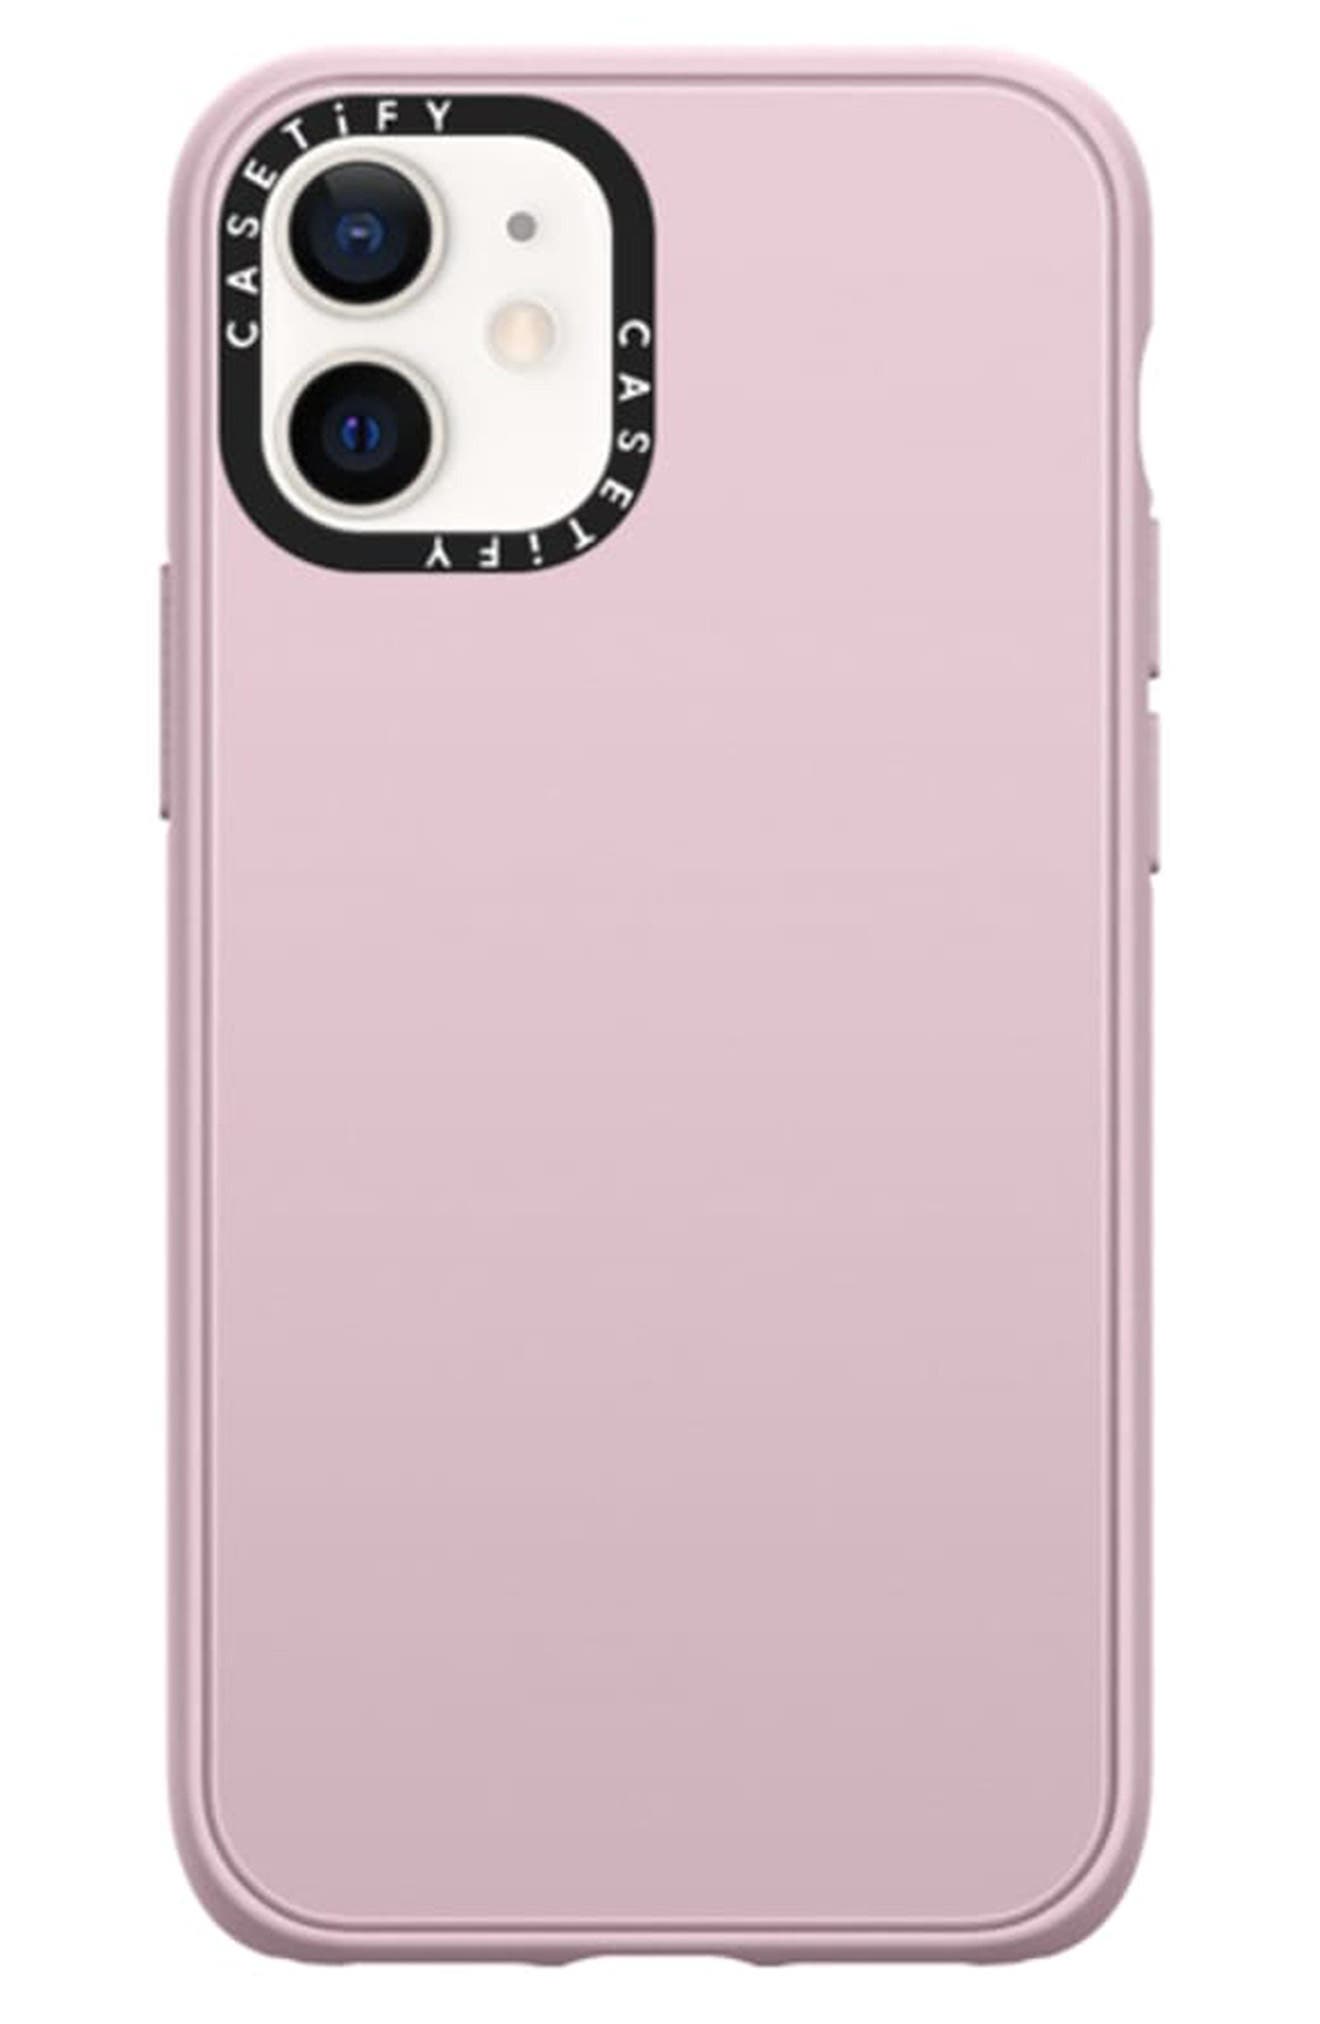 CASETiFY Solid Impact iPhone 12 Mini Case in Matte Lilac